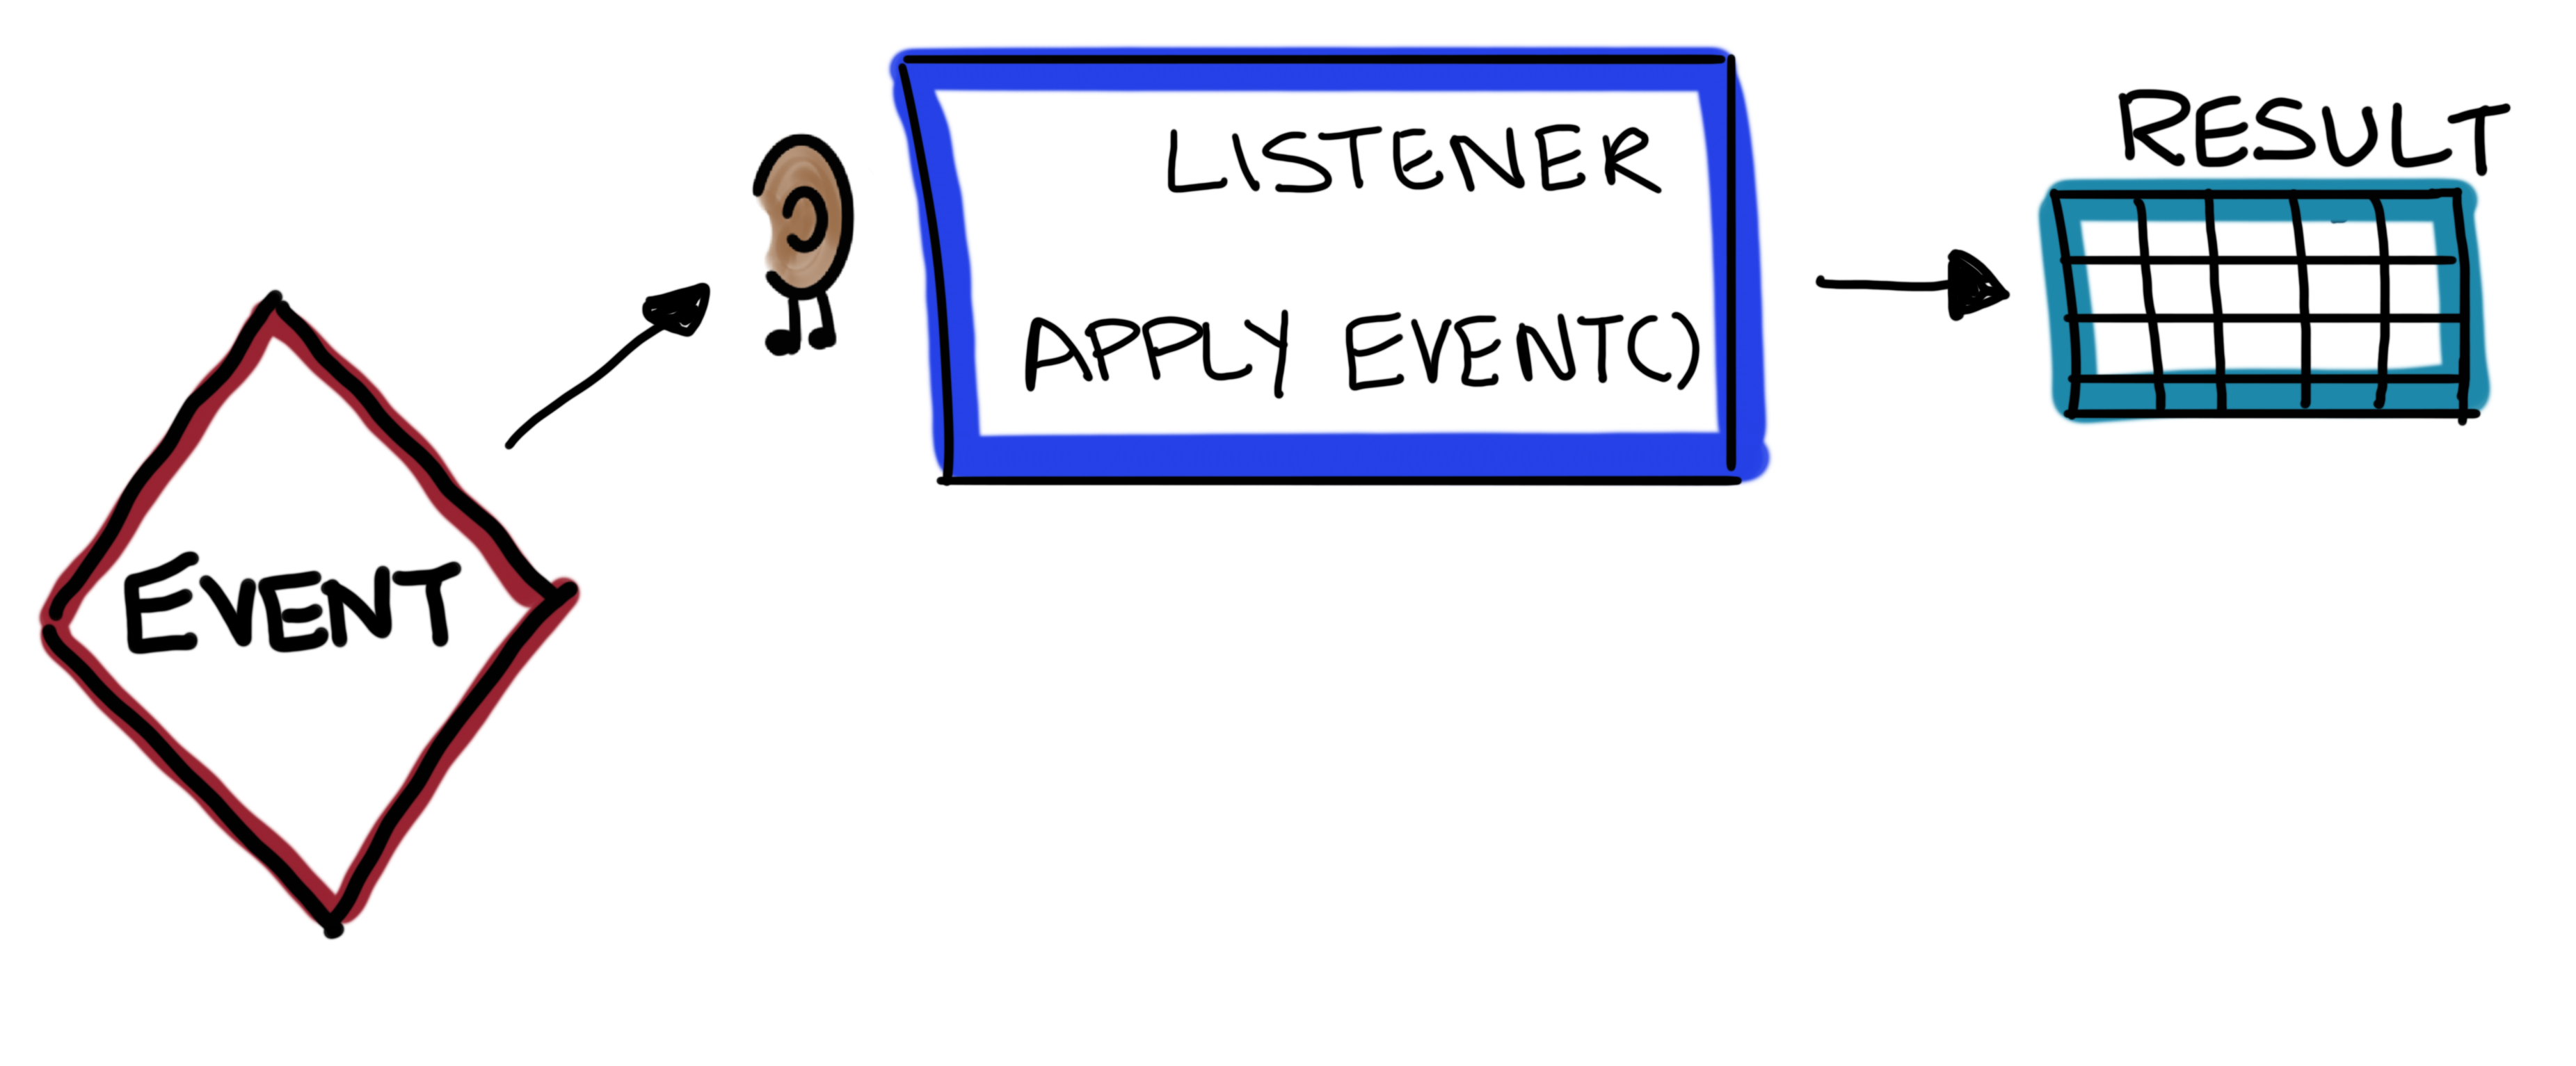 One event with one listener handling the event